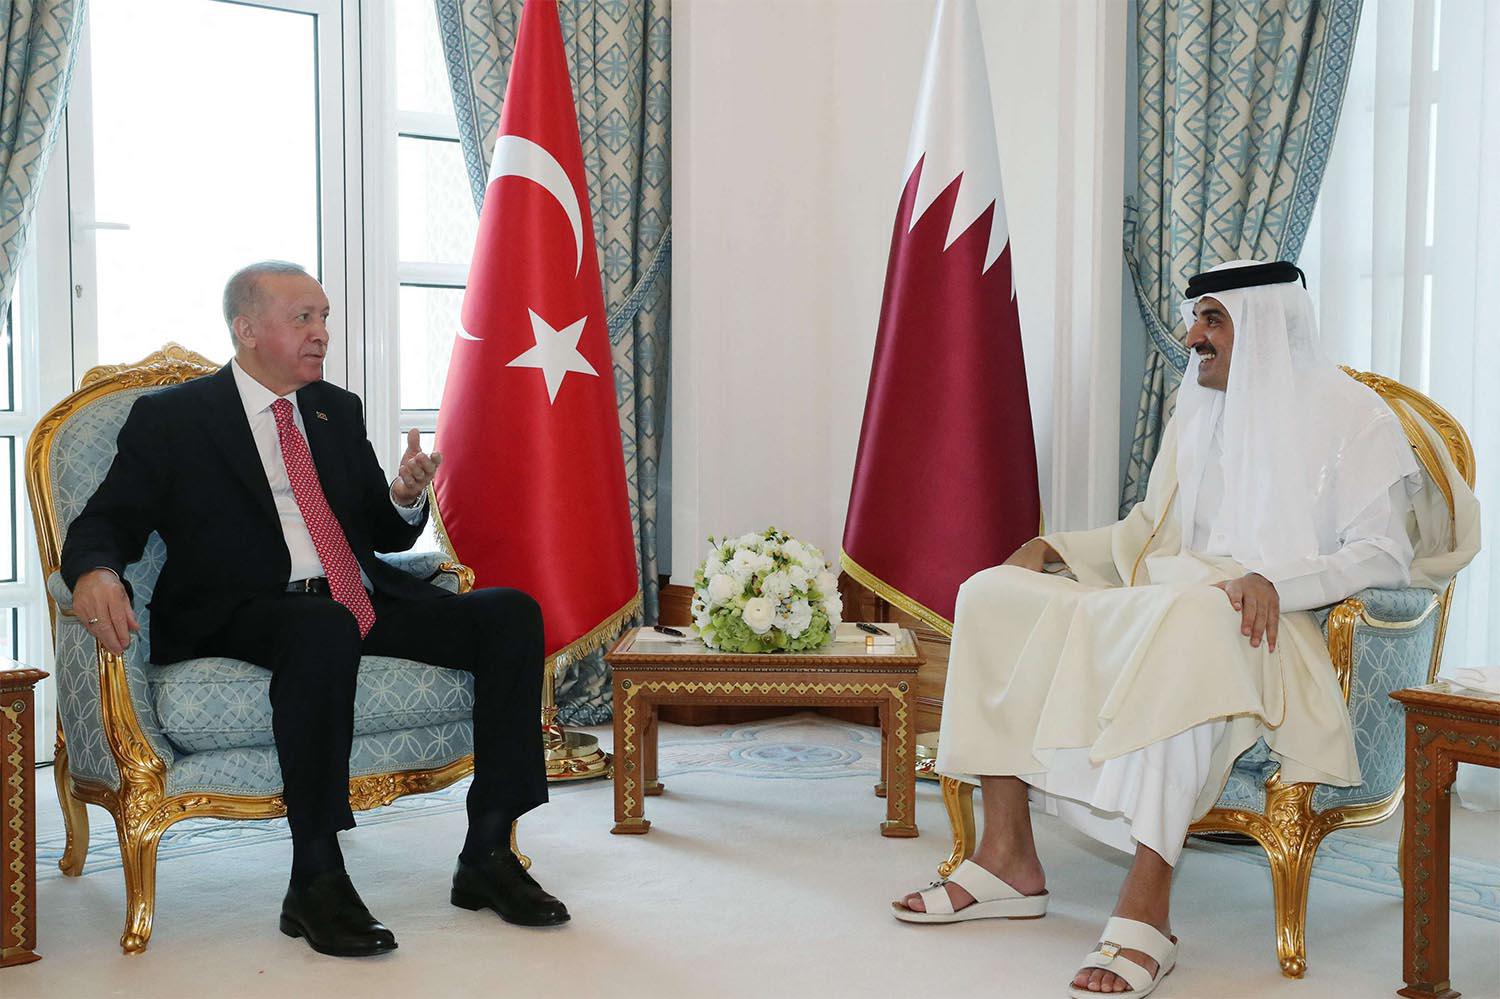 Qatar agreed to extend a currency swap agreement with Turkey